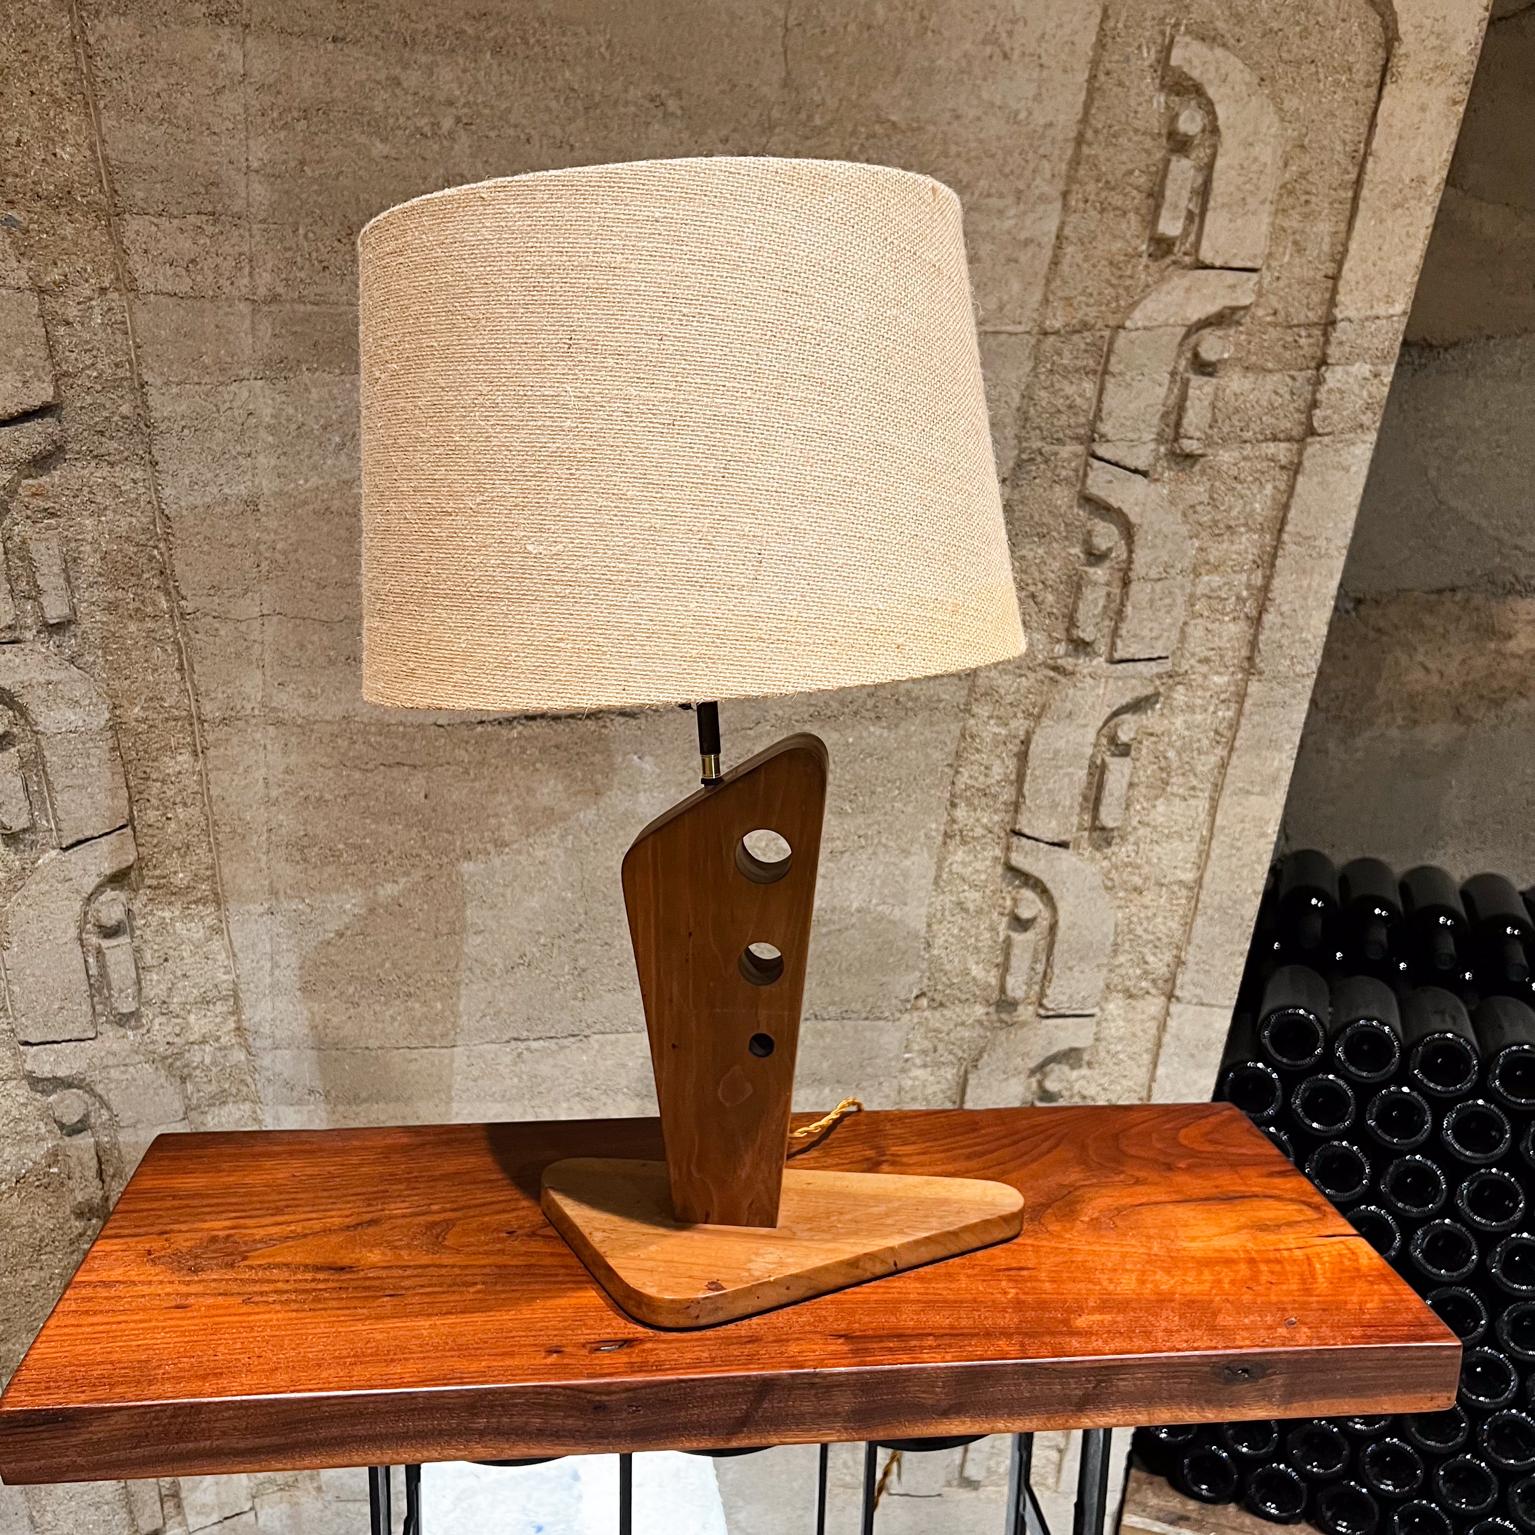 1950s Atomic Wood Table Lamp Geometric Triangular Design
by Georg Gin
18.5 tall x 12 w x 7 d
Preowned original unrestored vintage condition. Wear is present.
Lamp shade is not included.
See all images provided please.